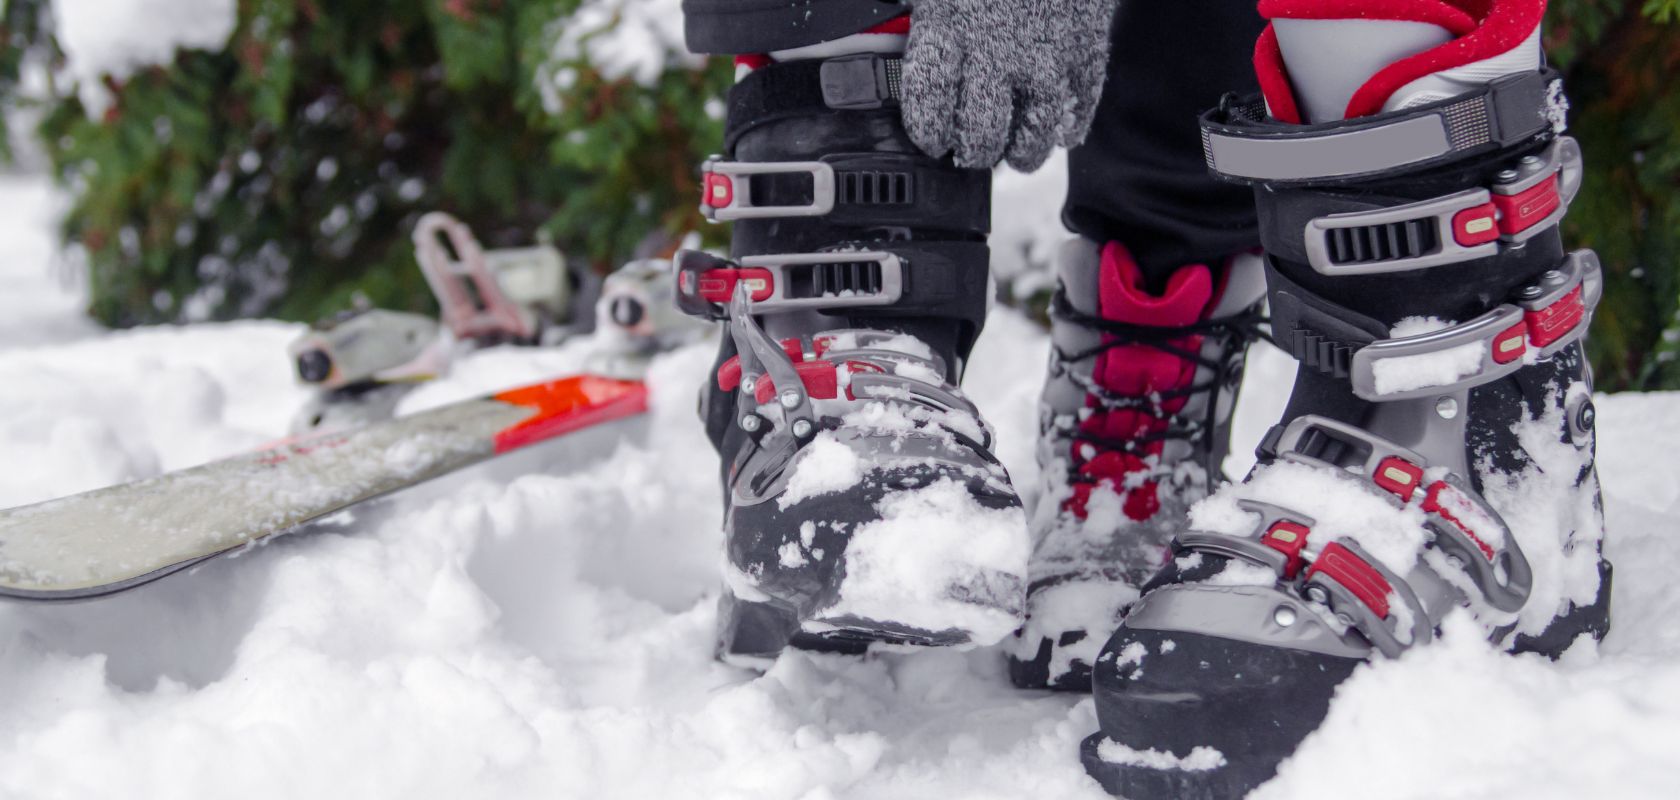 Boot Buying Guide | Snow+Rock